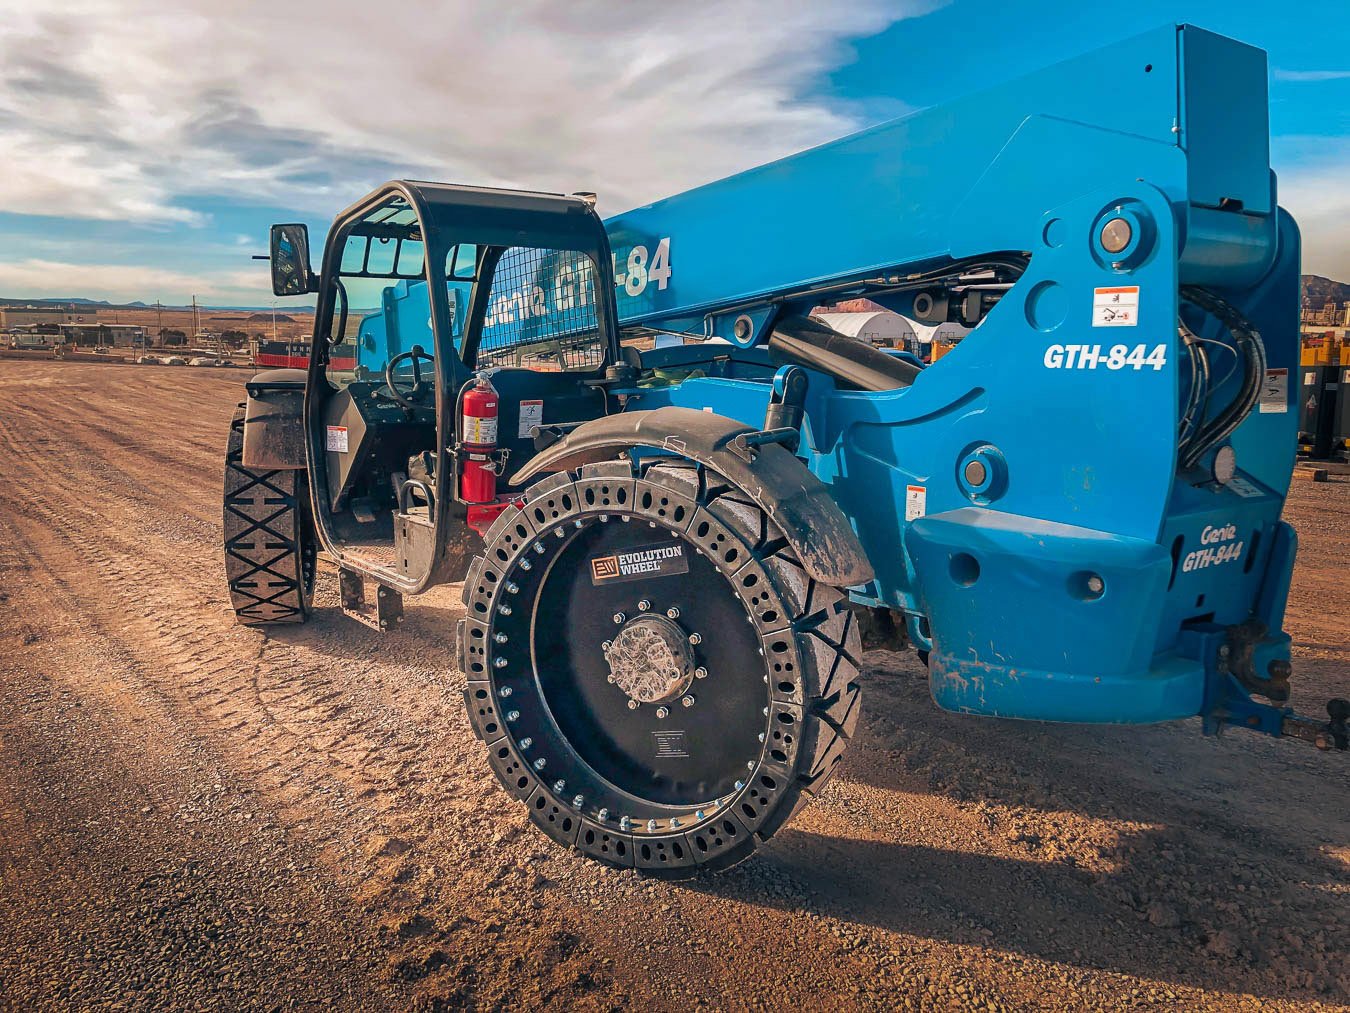 This image shows our JLG telehandler tires for a blue Genie telehandler.